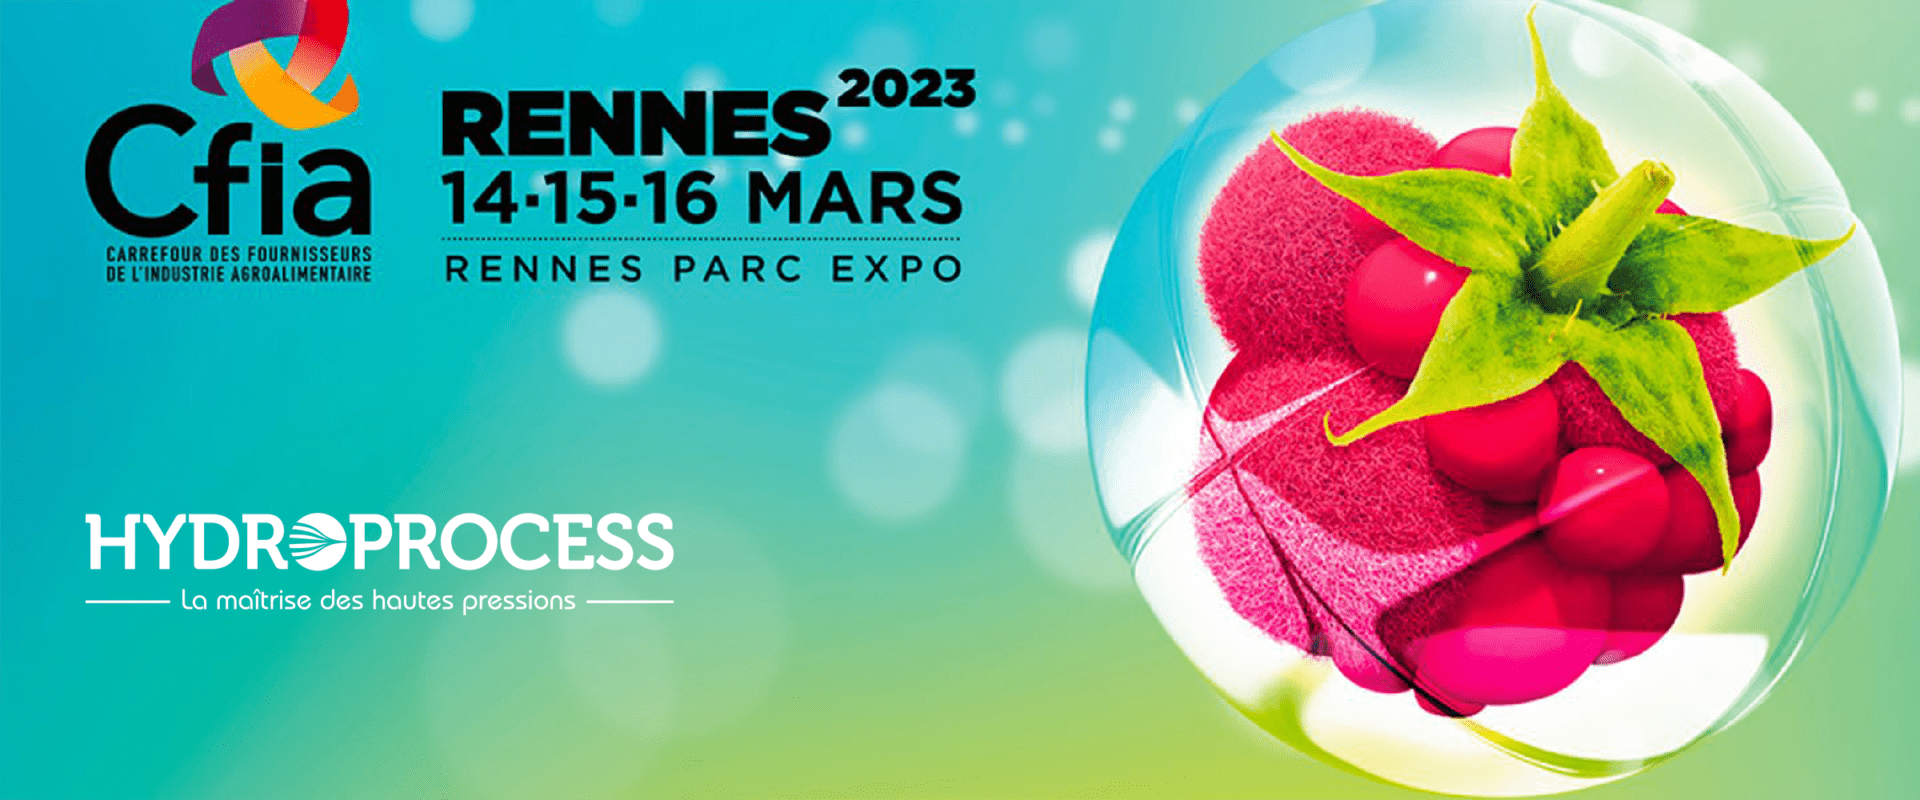 Come and discover ChefCut® at CFIA Rennes 2023!